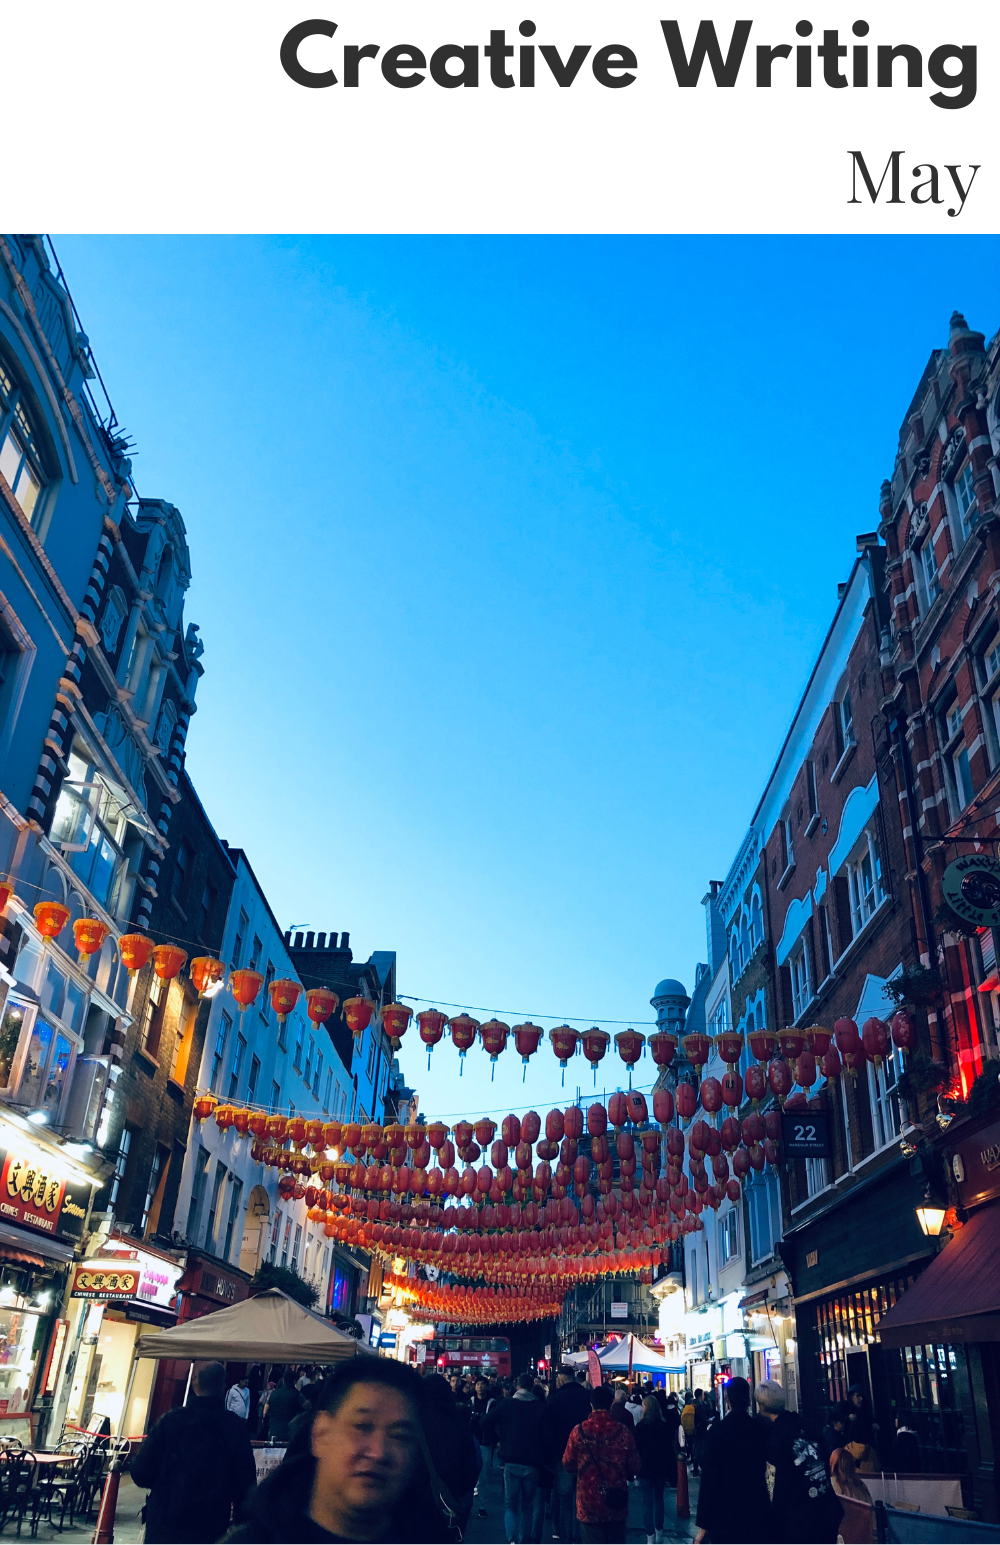 Cover of chapbook featuring a street view of Chinatown in London with red and gold paper lanterns strewn between the buildings. 